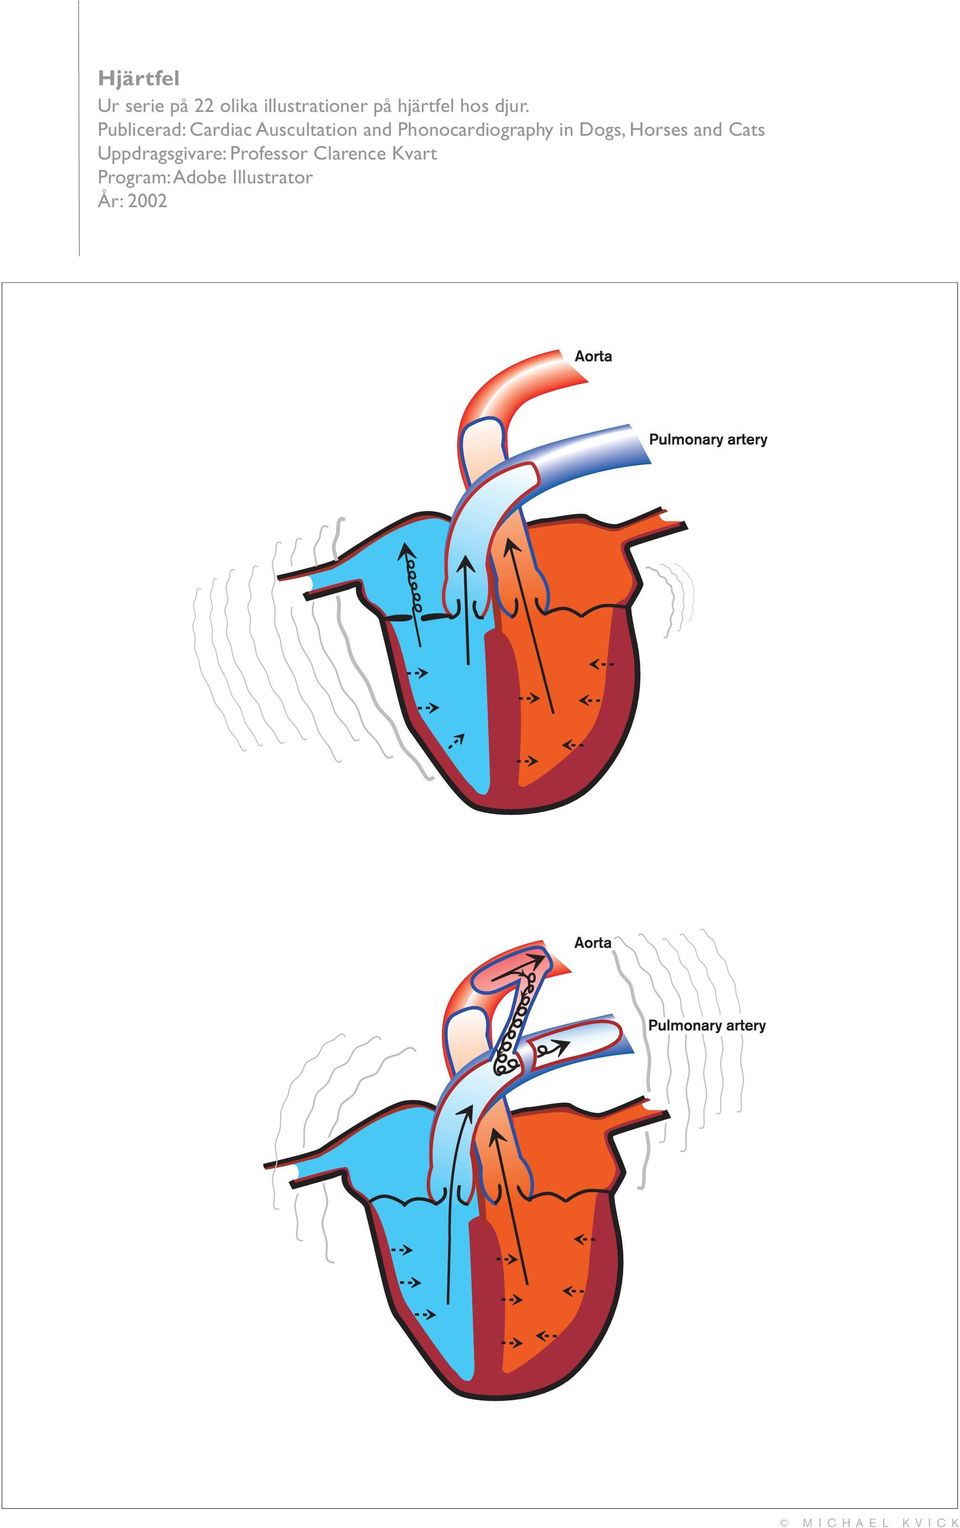 Publicerad: Cardiac Auscultation and Phonocardiography